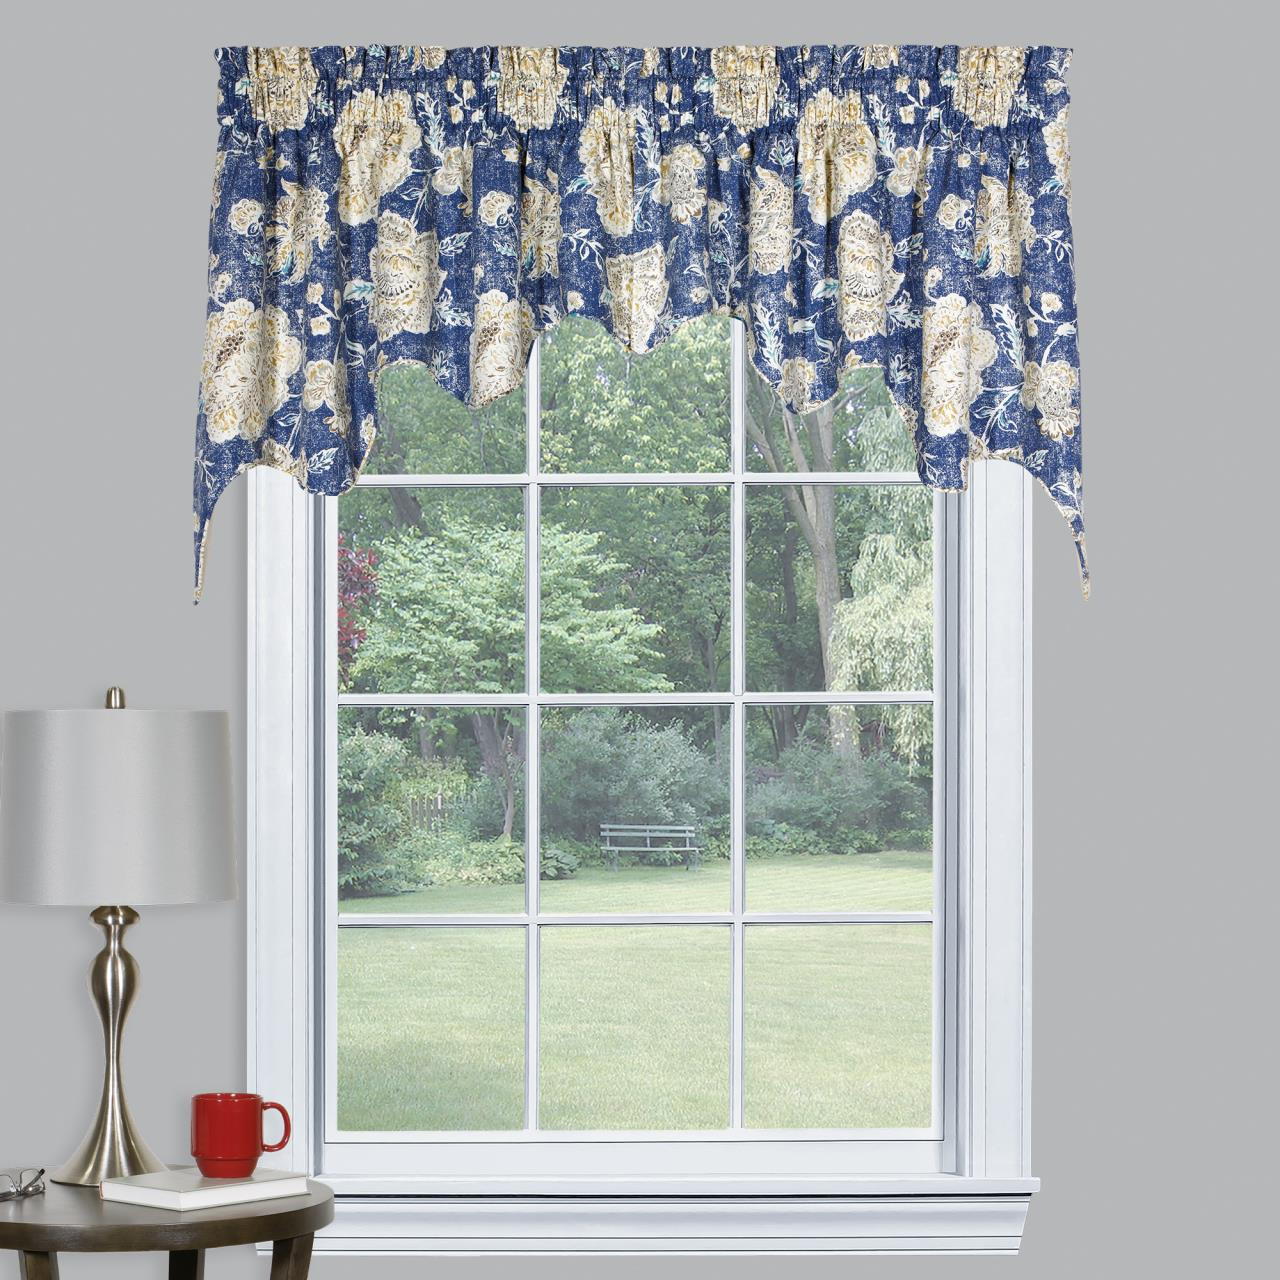 Seabrook Empress Valance by Thomasville | Paul's Home Fashions